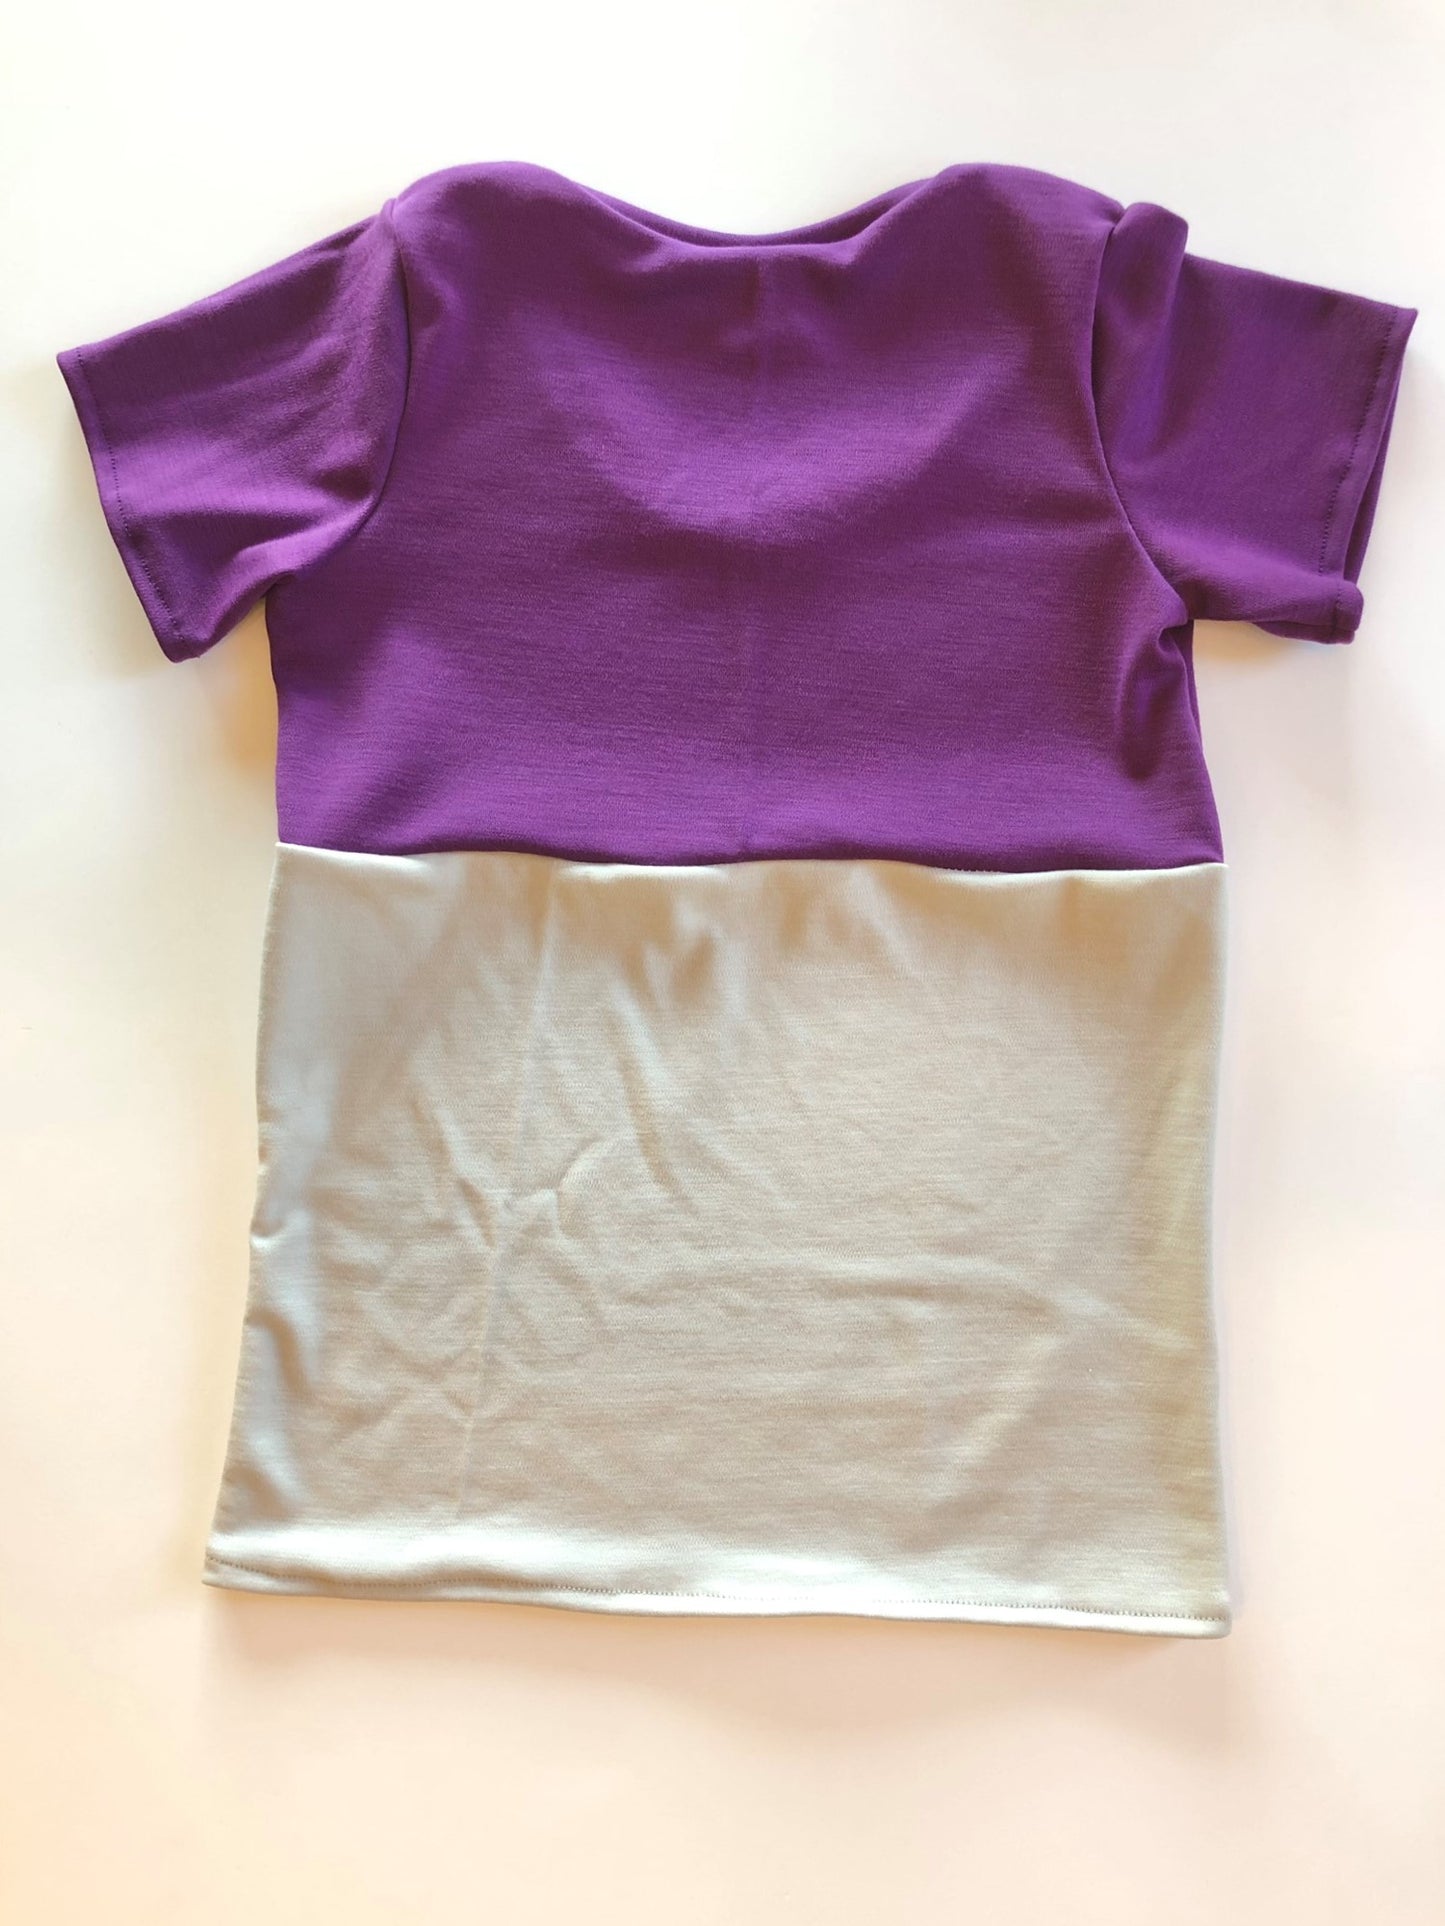 Kid's Size 10 Wool T-shirt - Ready to ship!